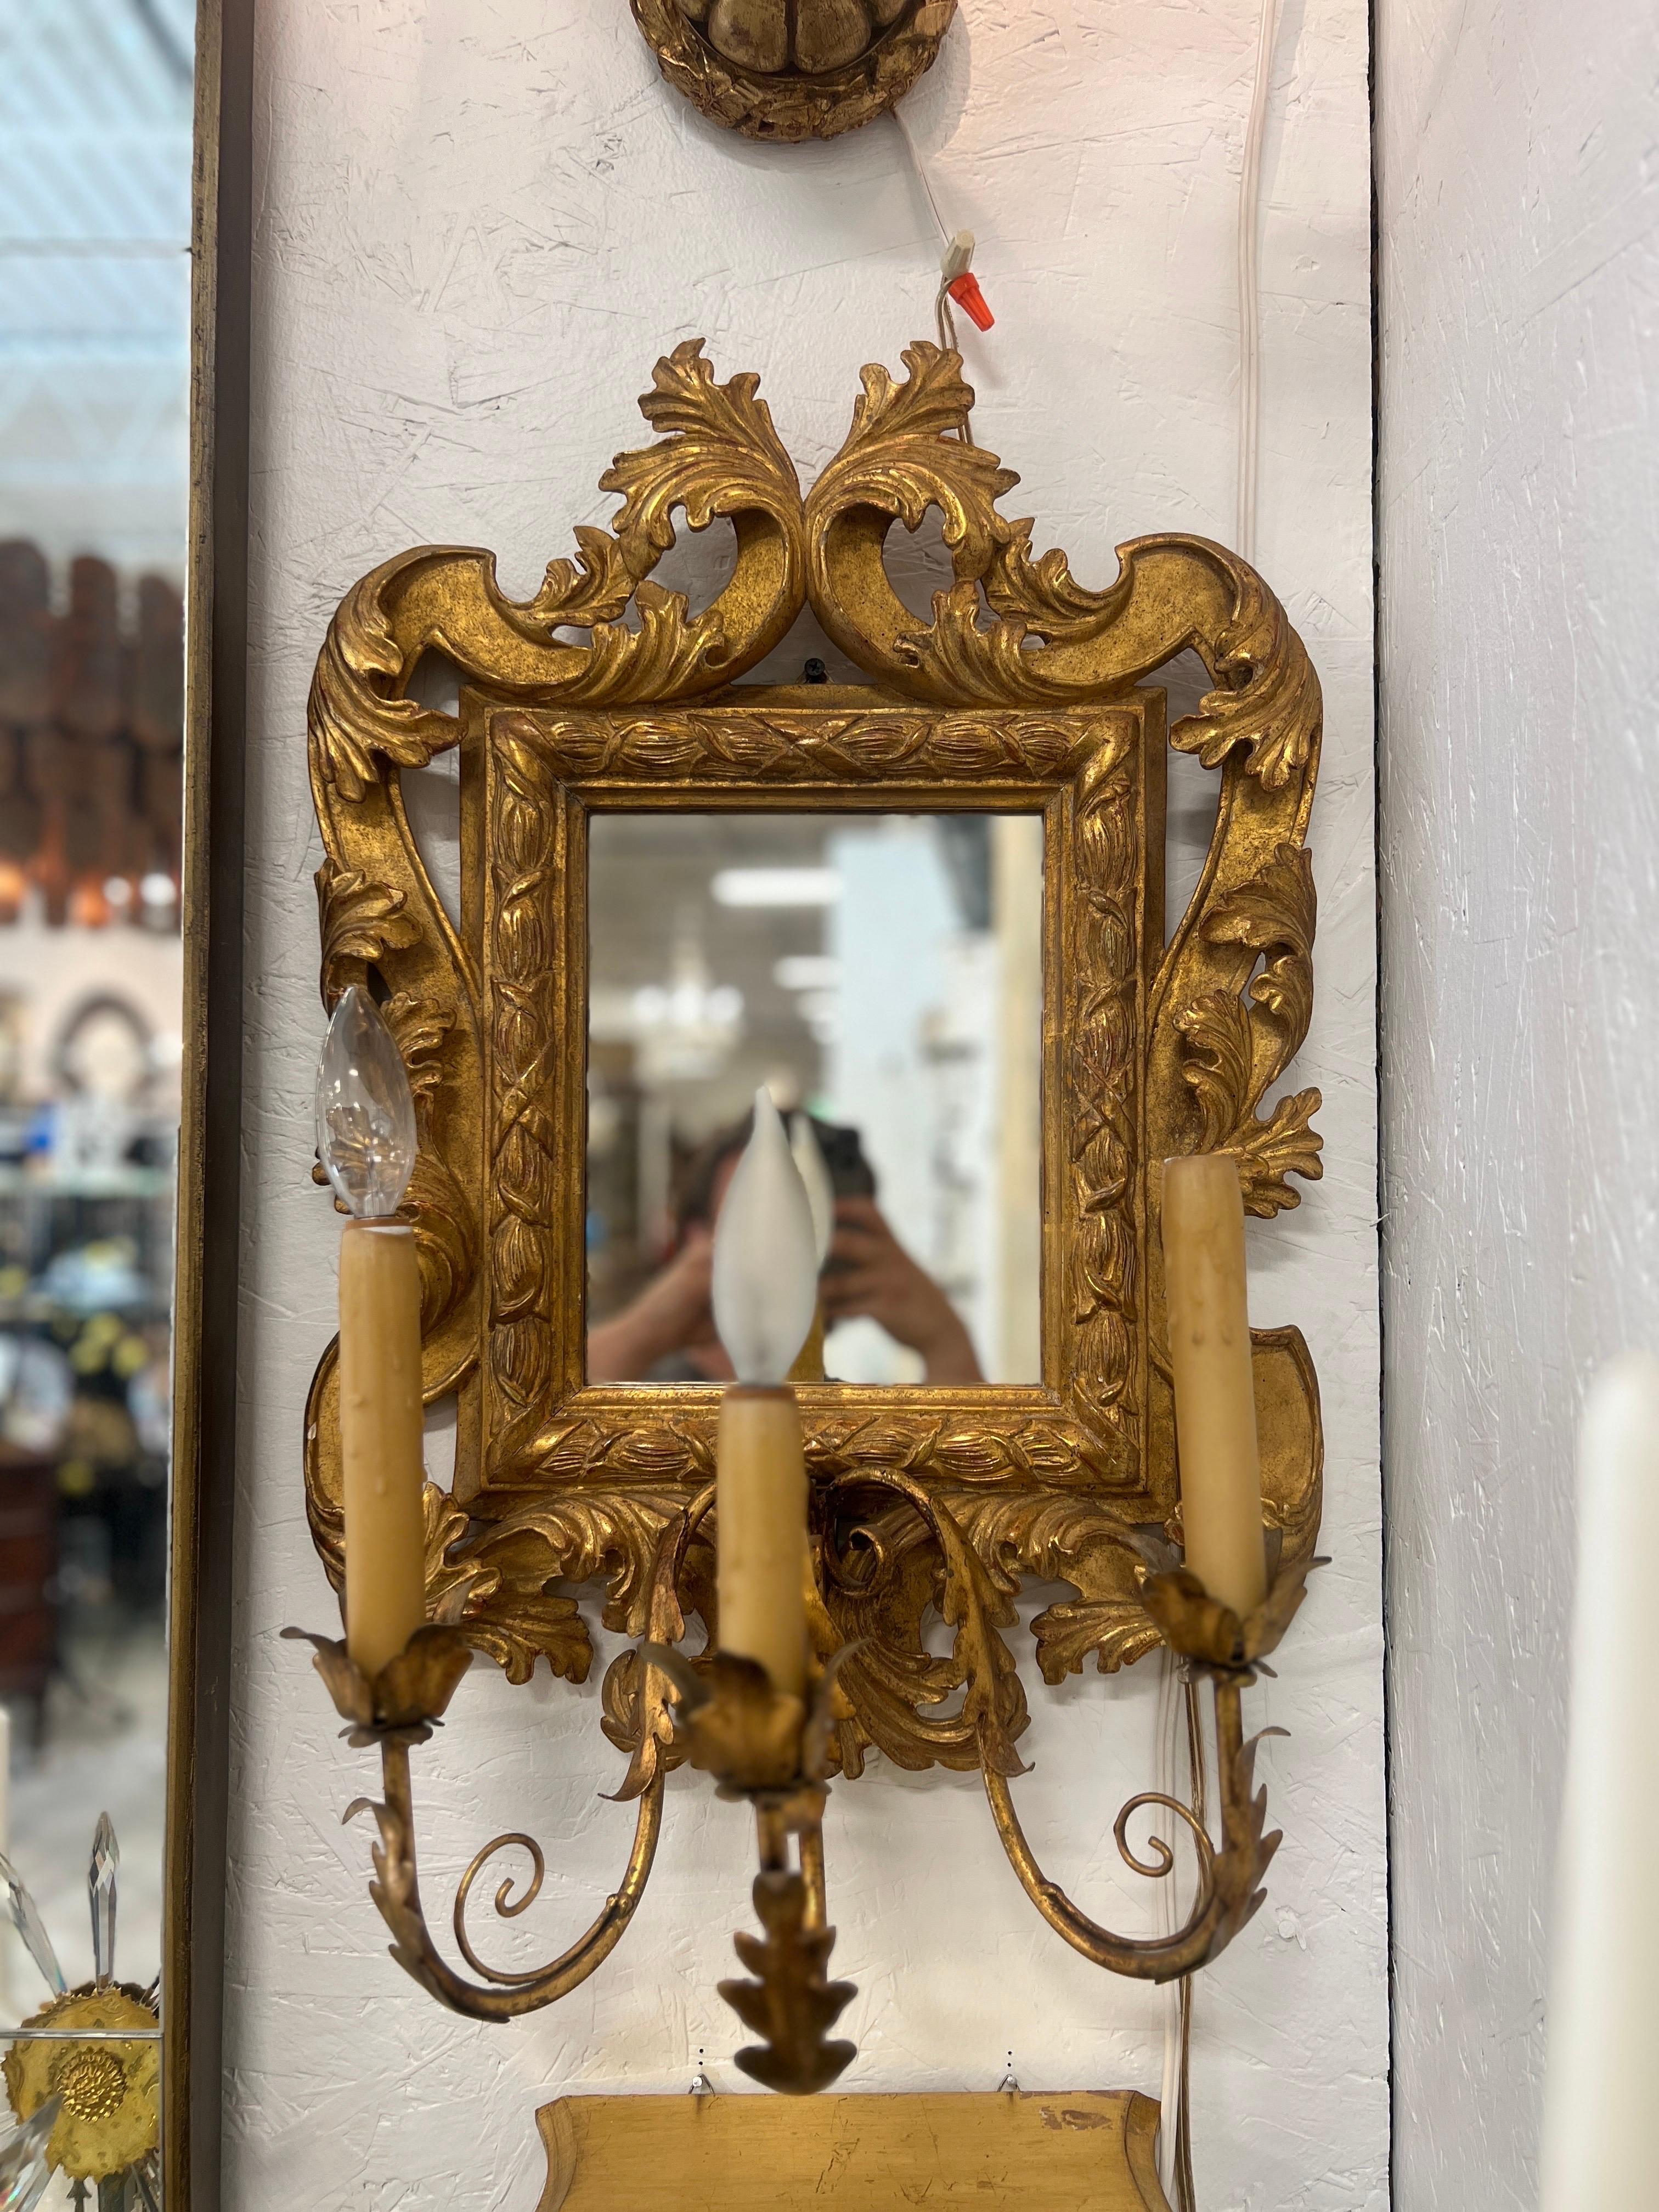 Italian, 20th century.

A pair of vintage Italian made giltwood mirrors with a fine Rococo style frame, acanthus leaf carvings and three tole acanthus arms. Each arm is electrified with wax candle covers and in working condition. Marked to verso